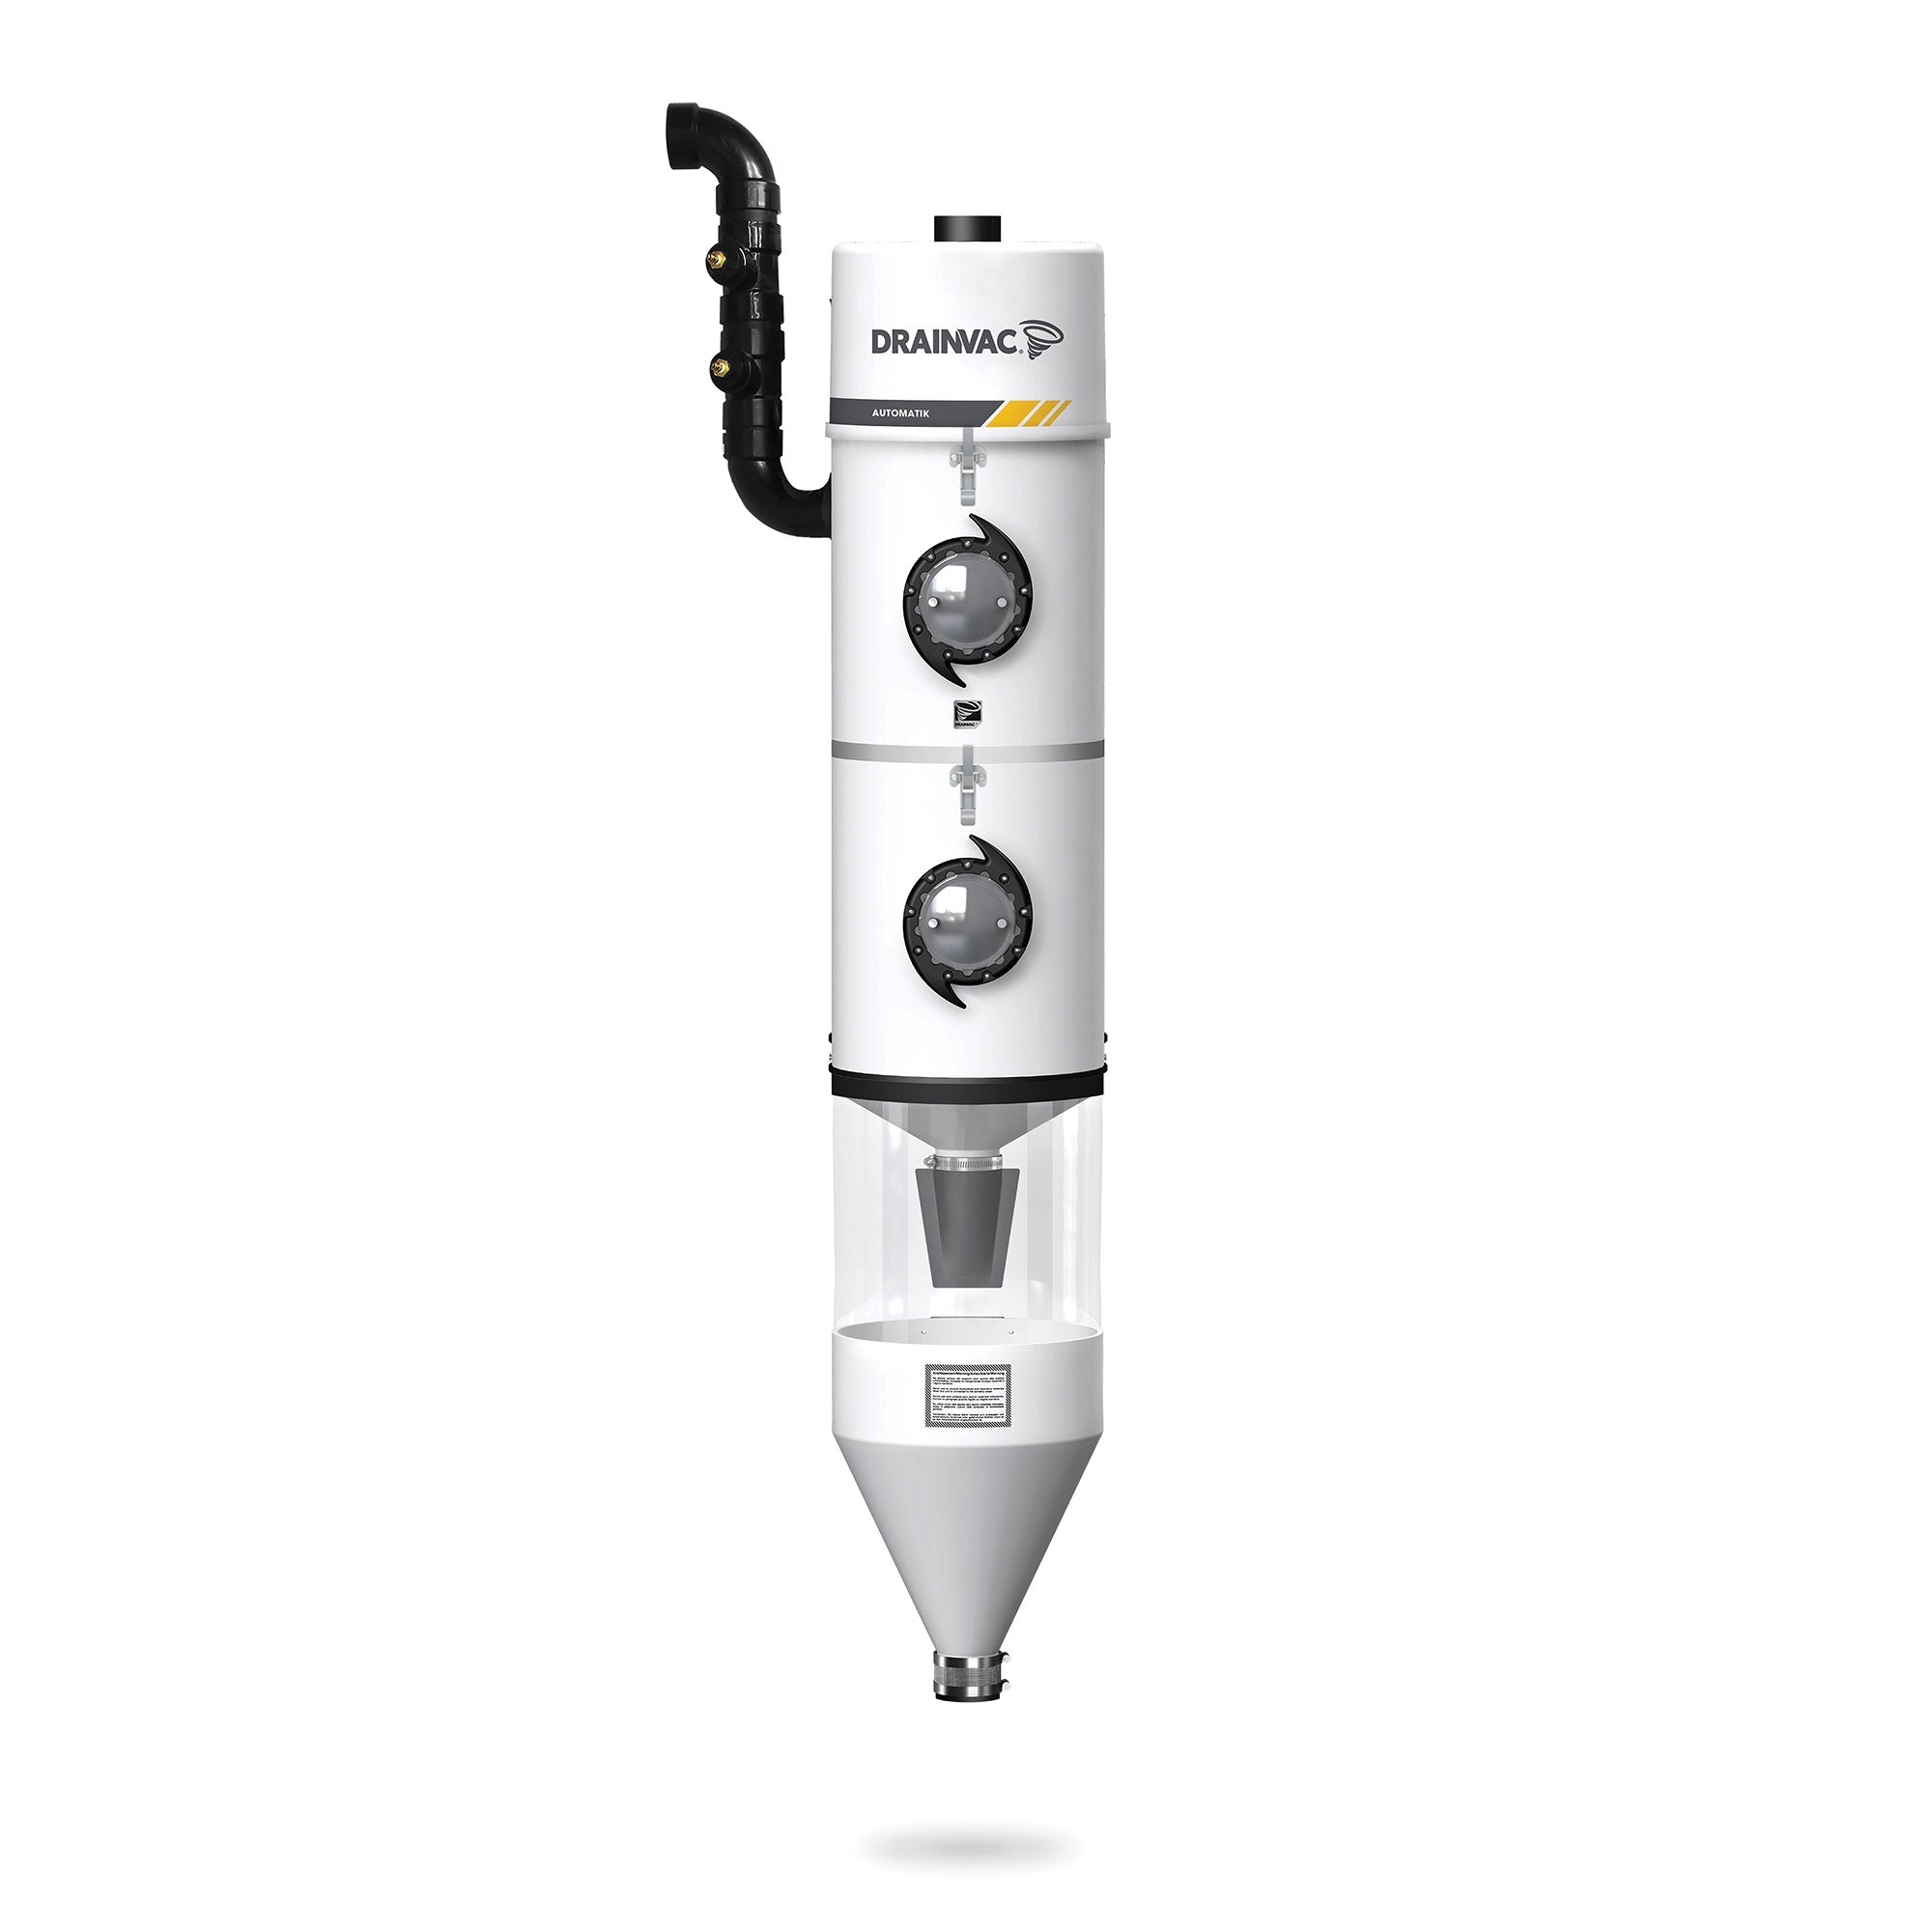 DrainVac SEPAAUTO-5 Automatik Commercial Wet/Dry Central Vacuum with Self-Flushing Separator and REGEN11HP Motor